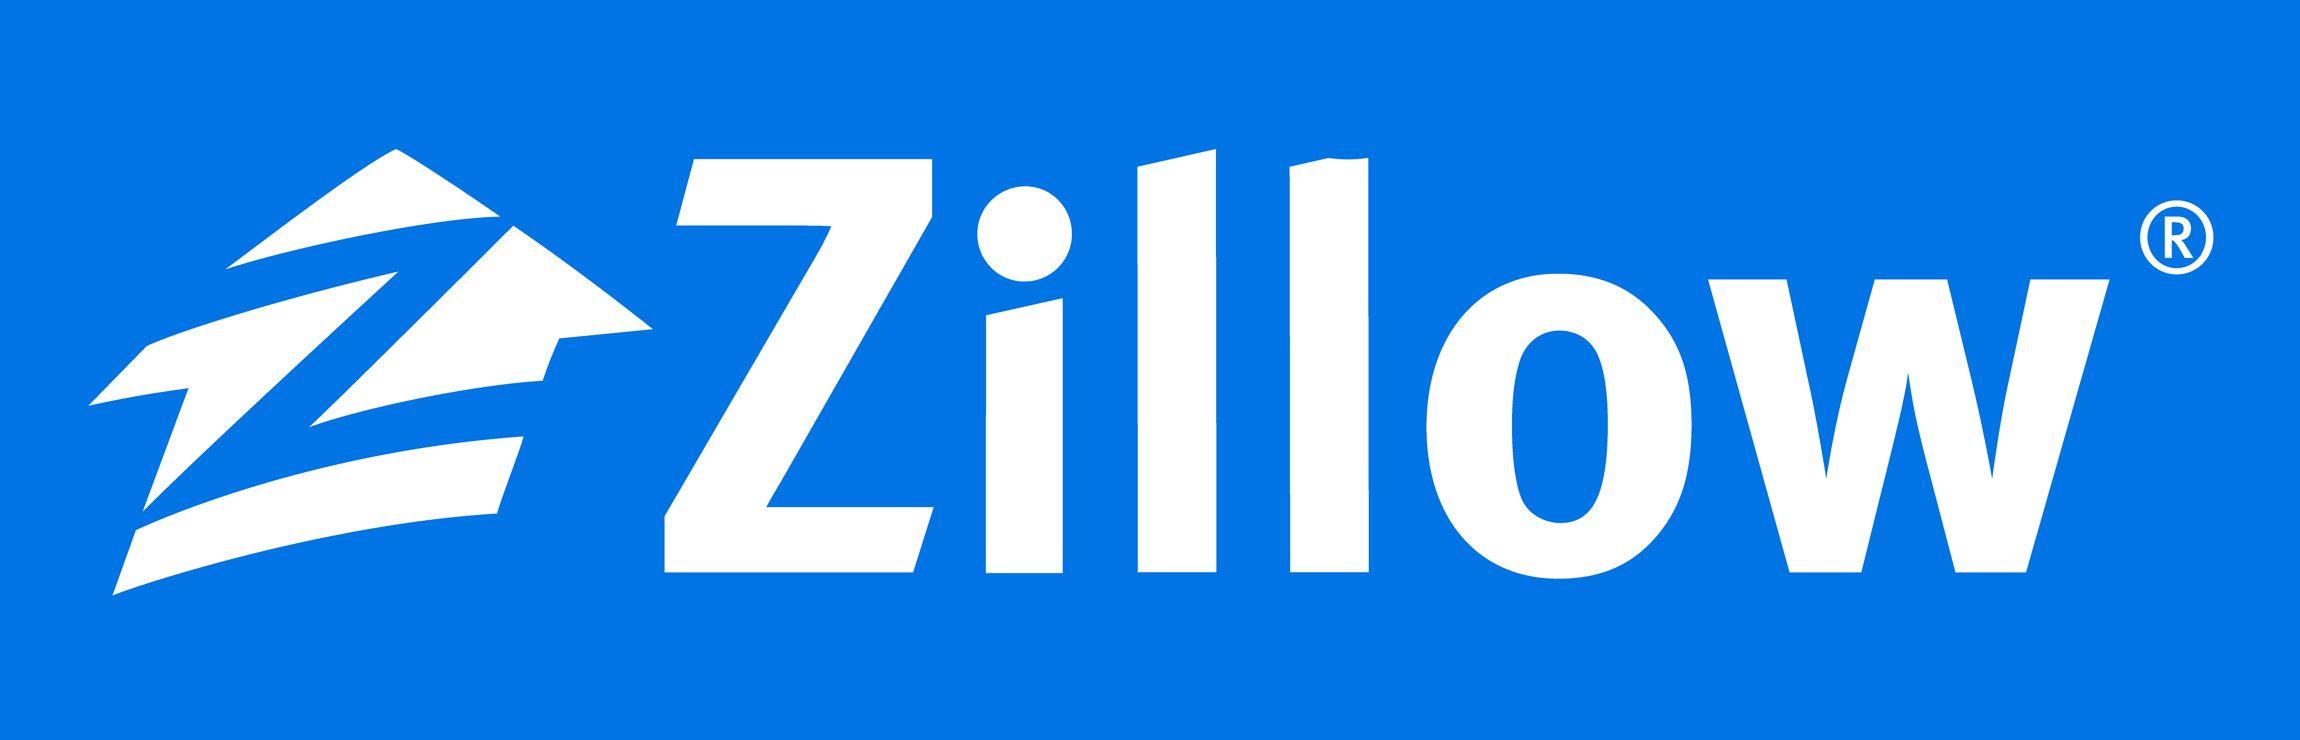 Zillow Transparent Logo - Zillow Expands Quickly Into Canada